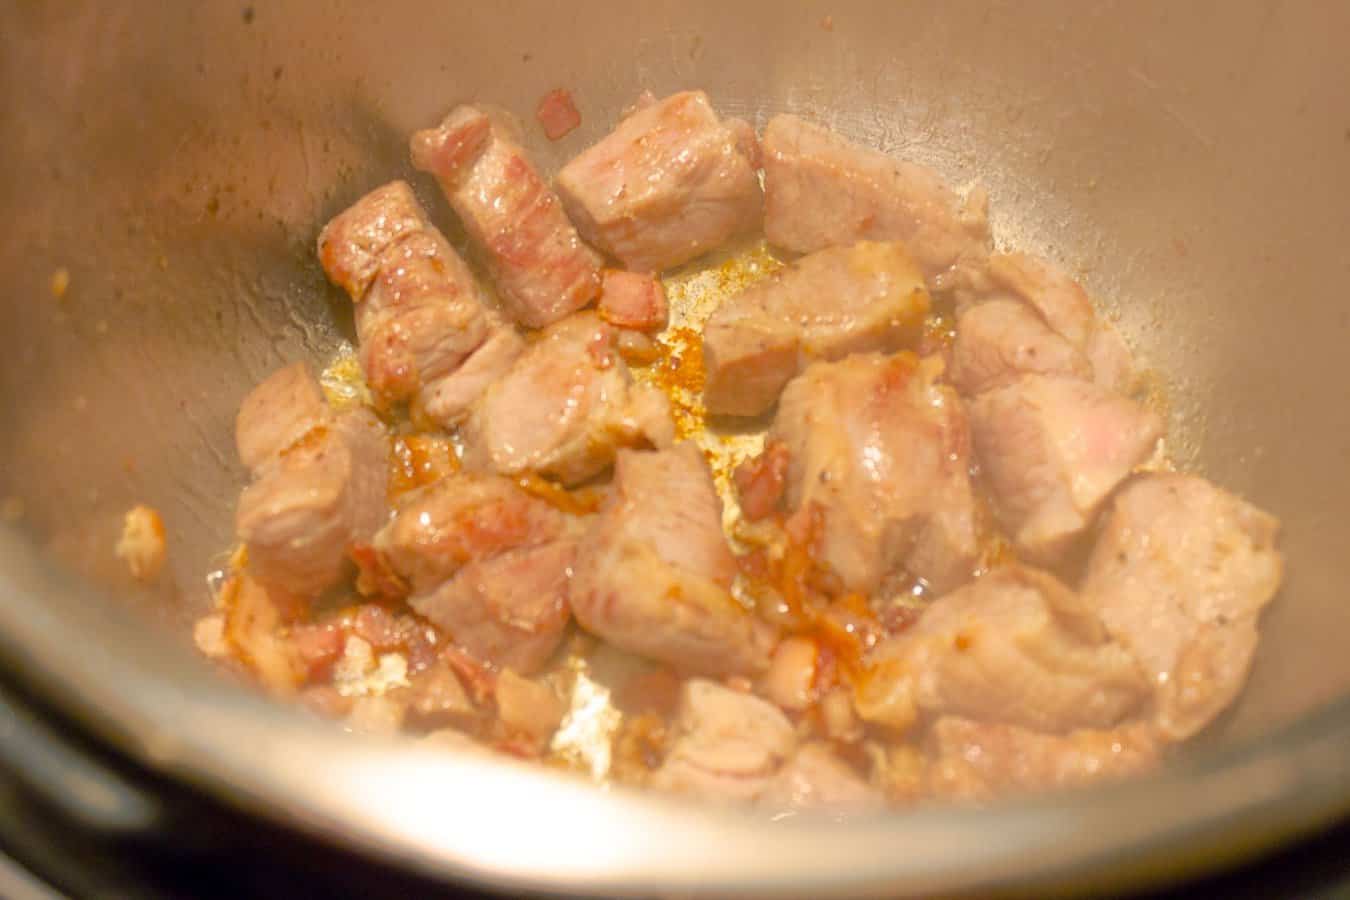 Pork and bacon being browned for Instant Pot Pressure Cooker Red Pork Chili